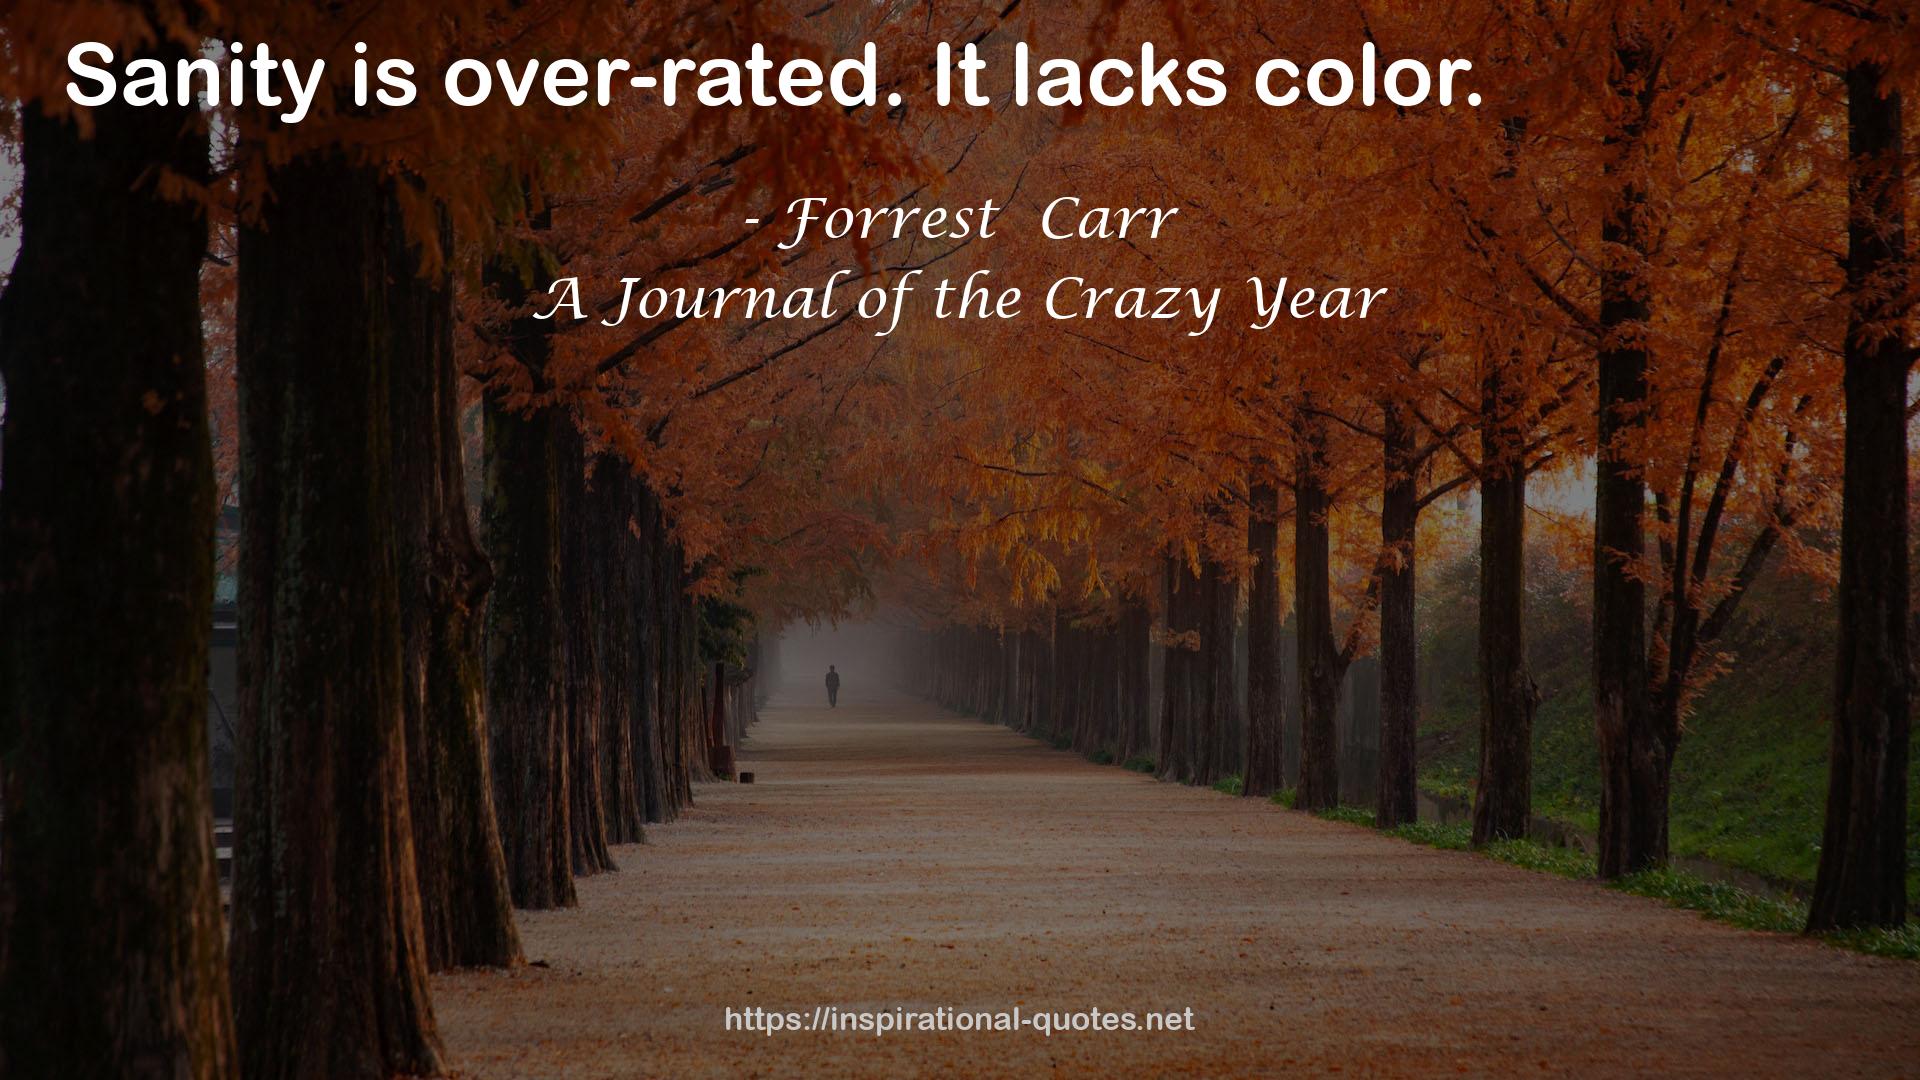 A Journal of the Crazy Year QUOTES